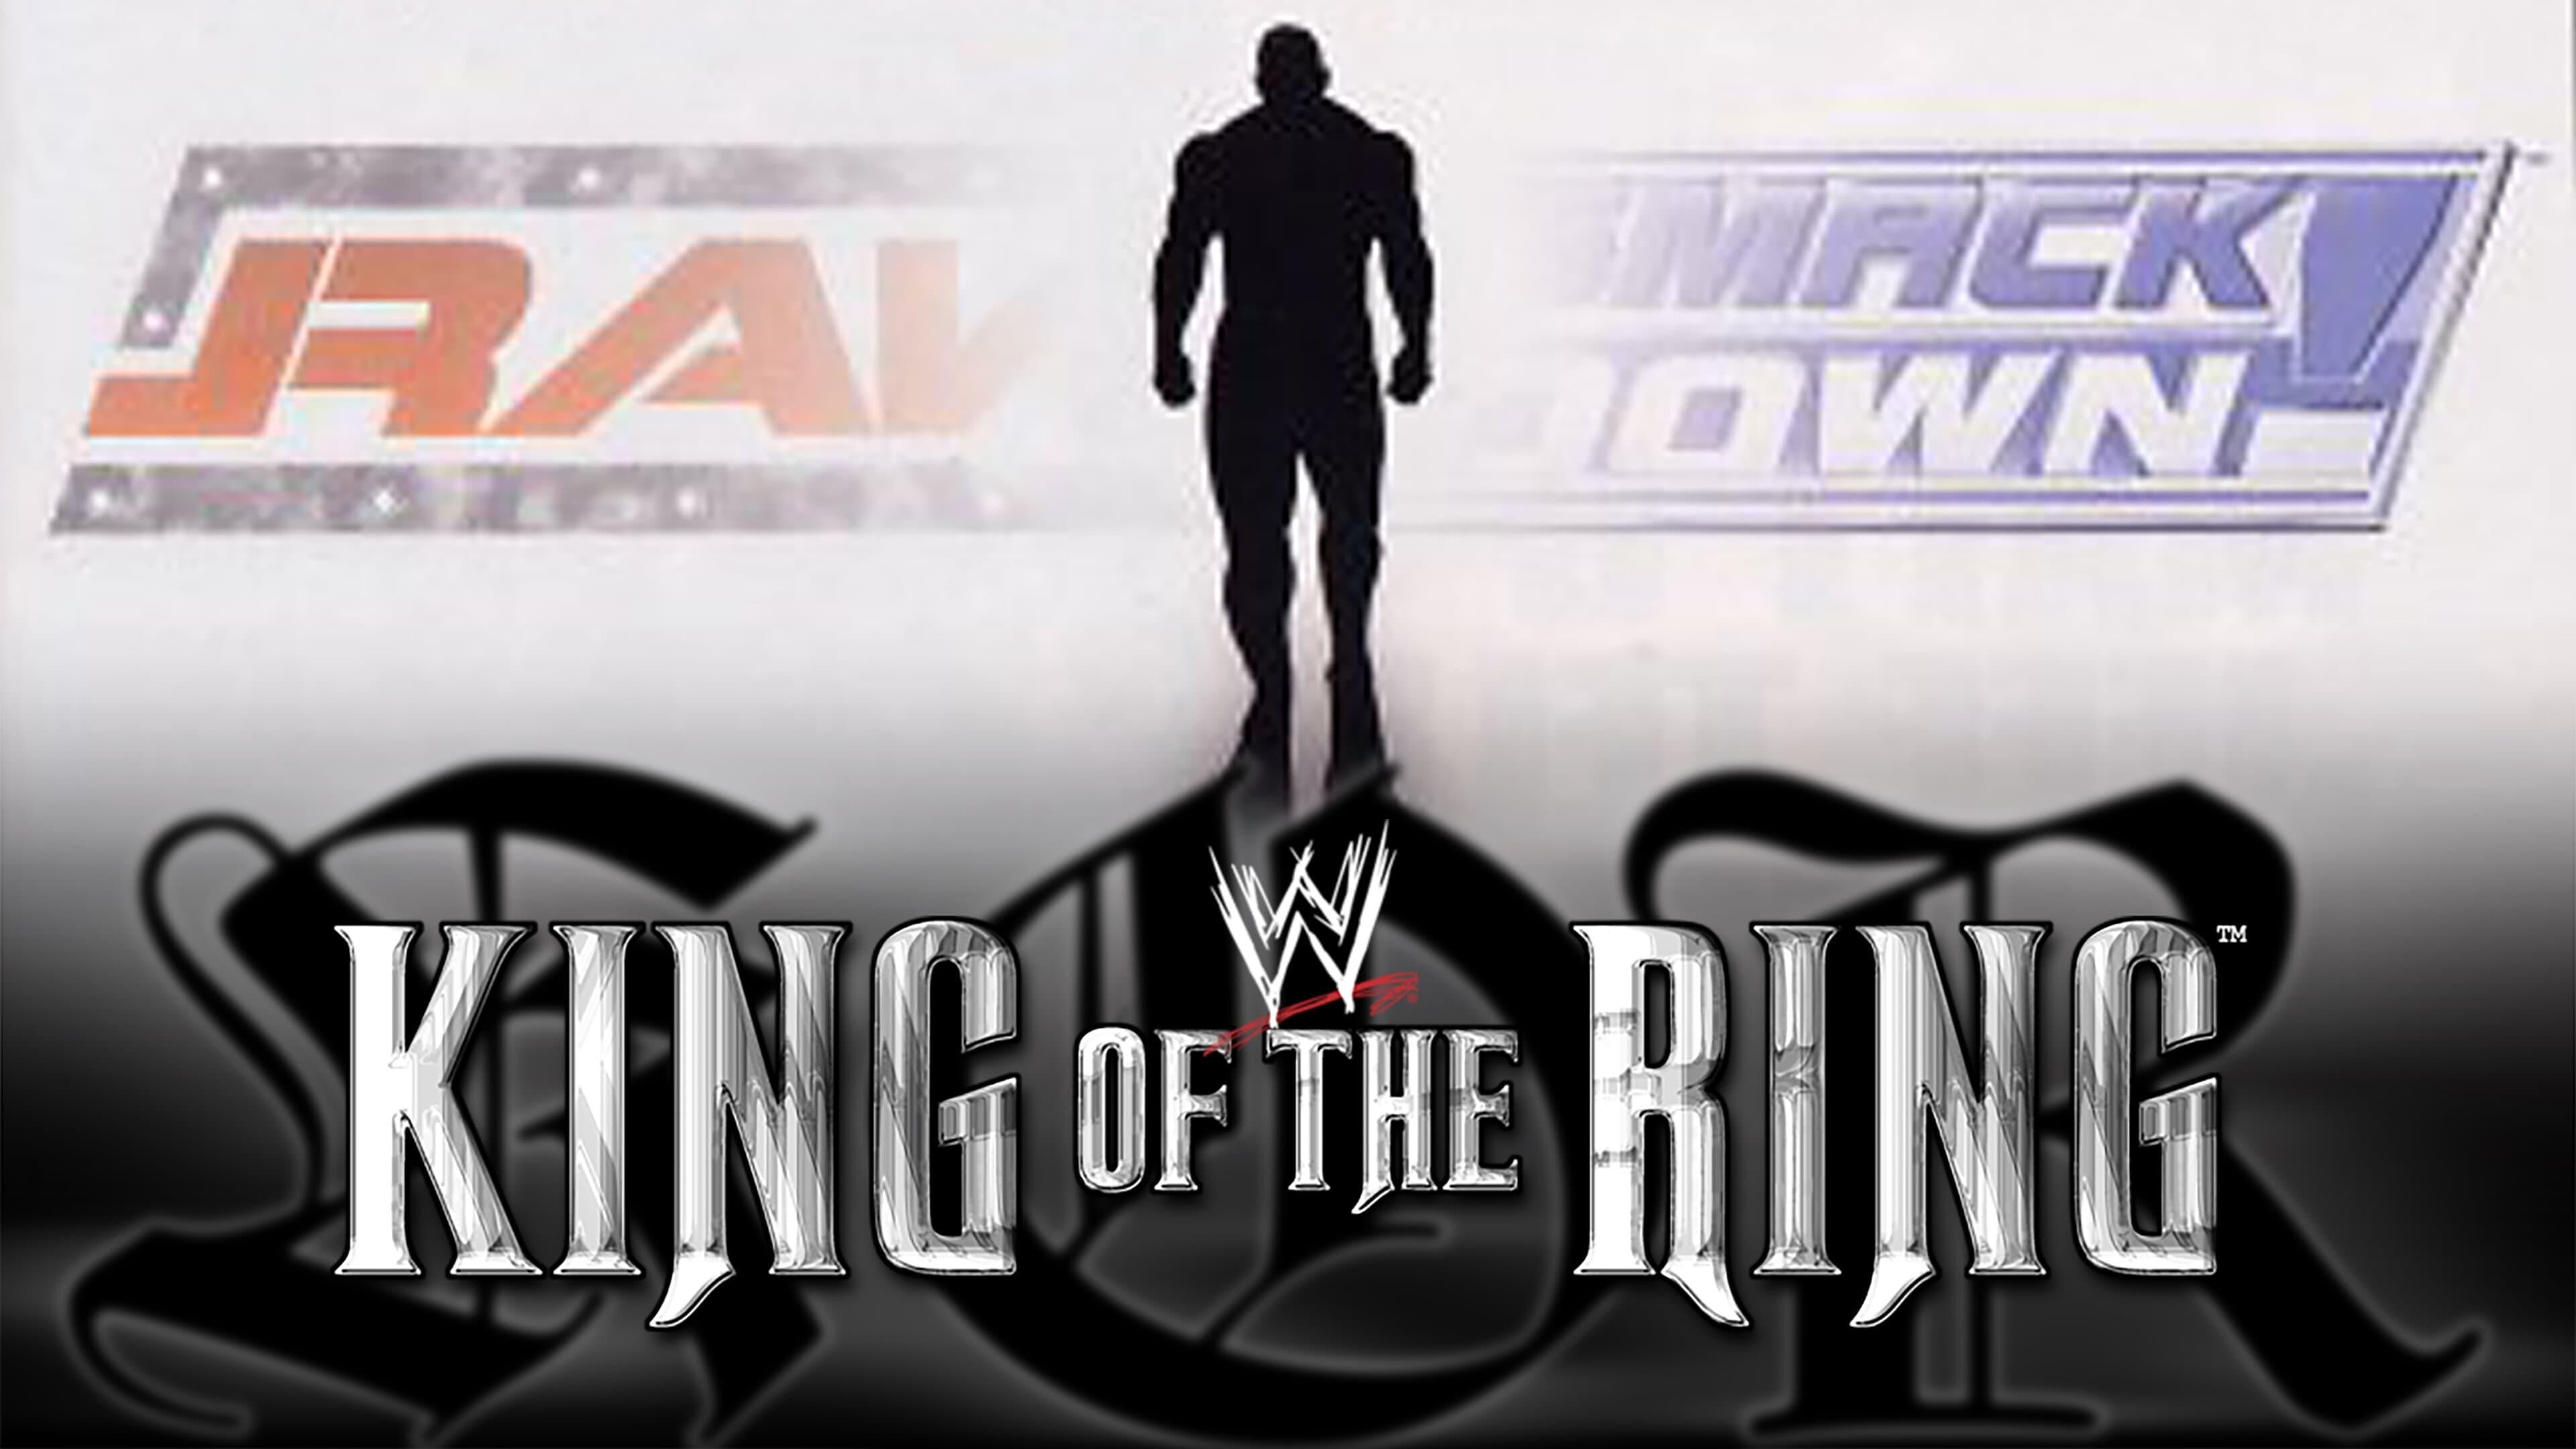 WWE King of the Ring 2002 backdrop